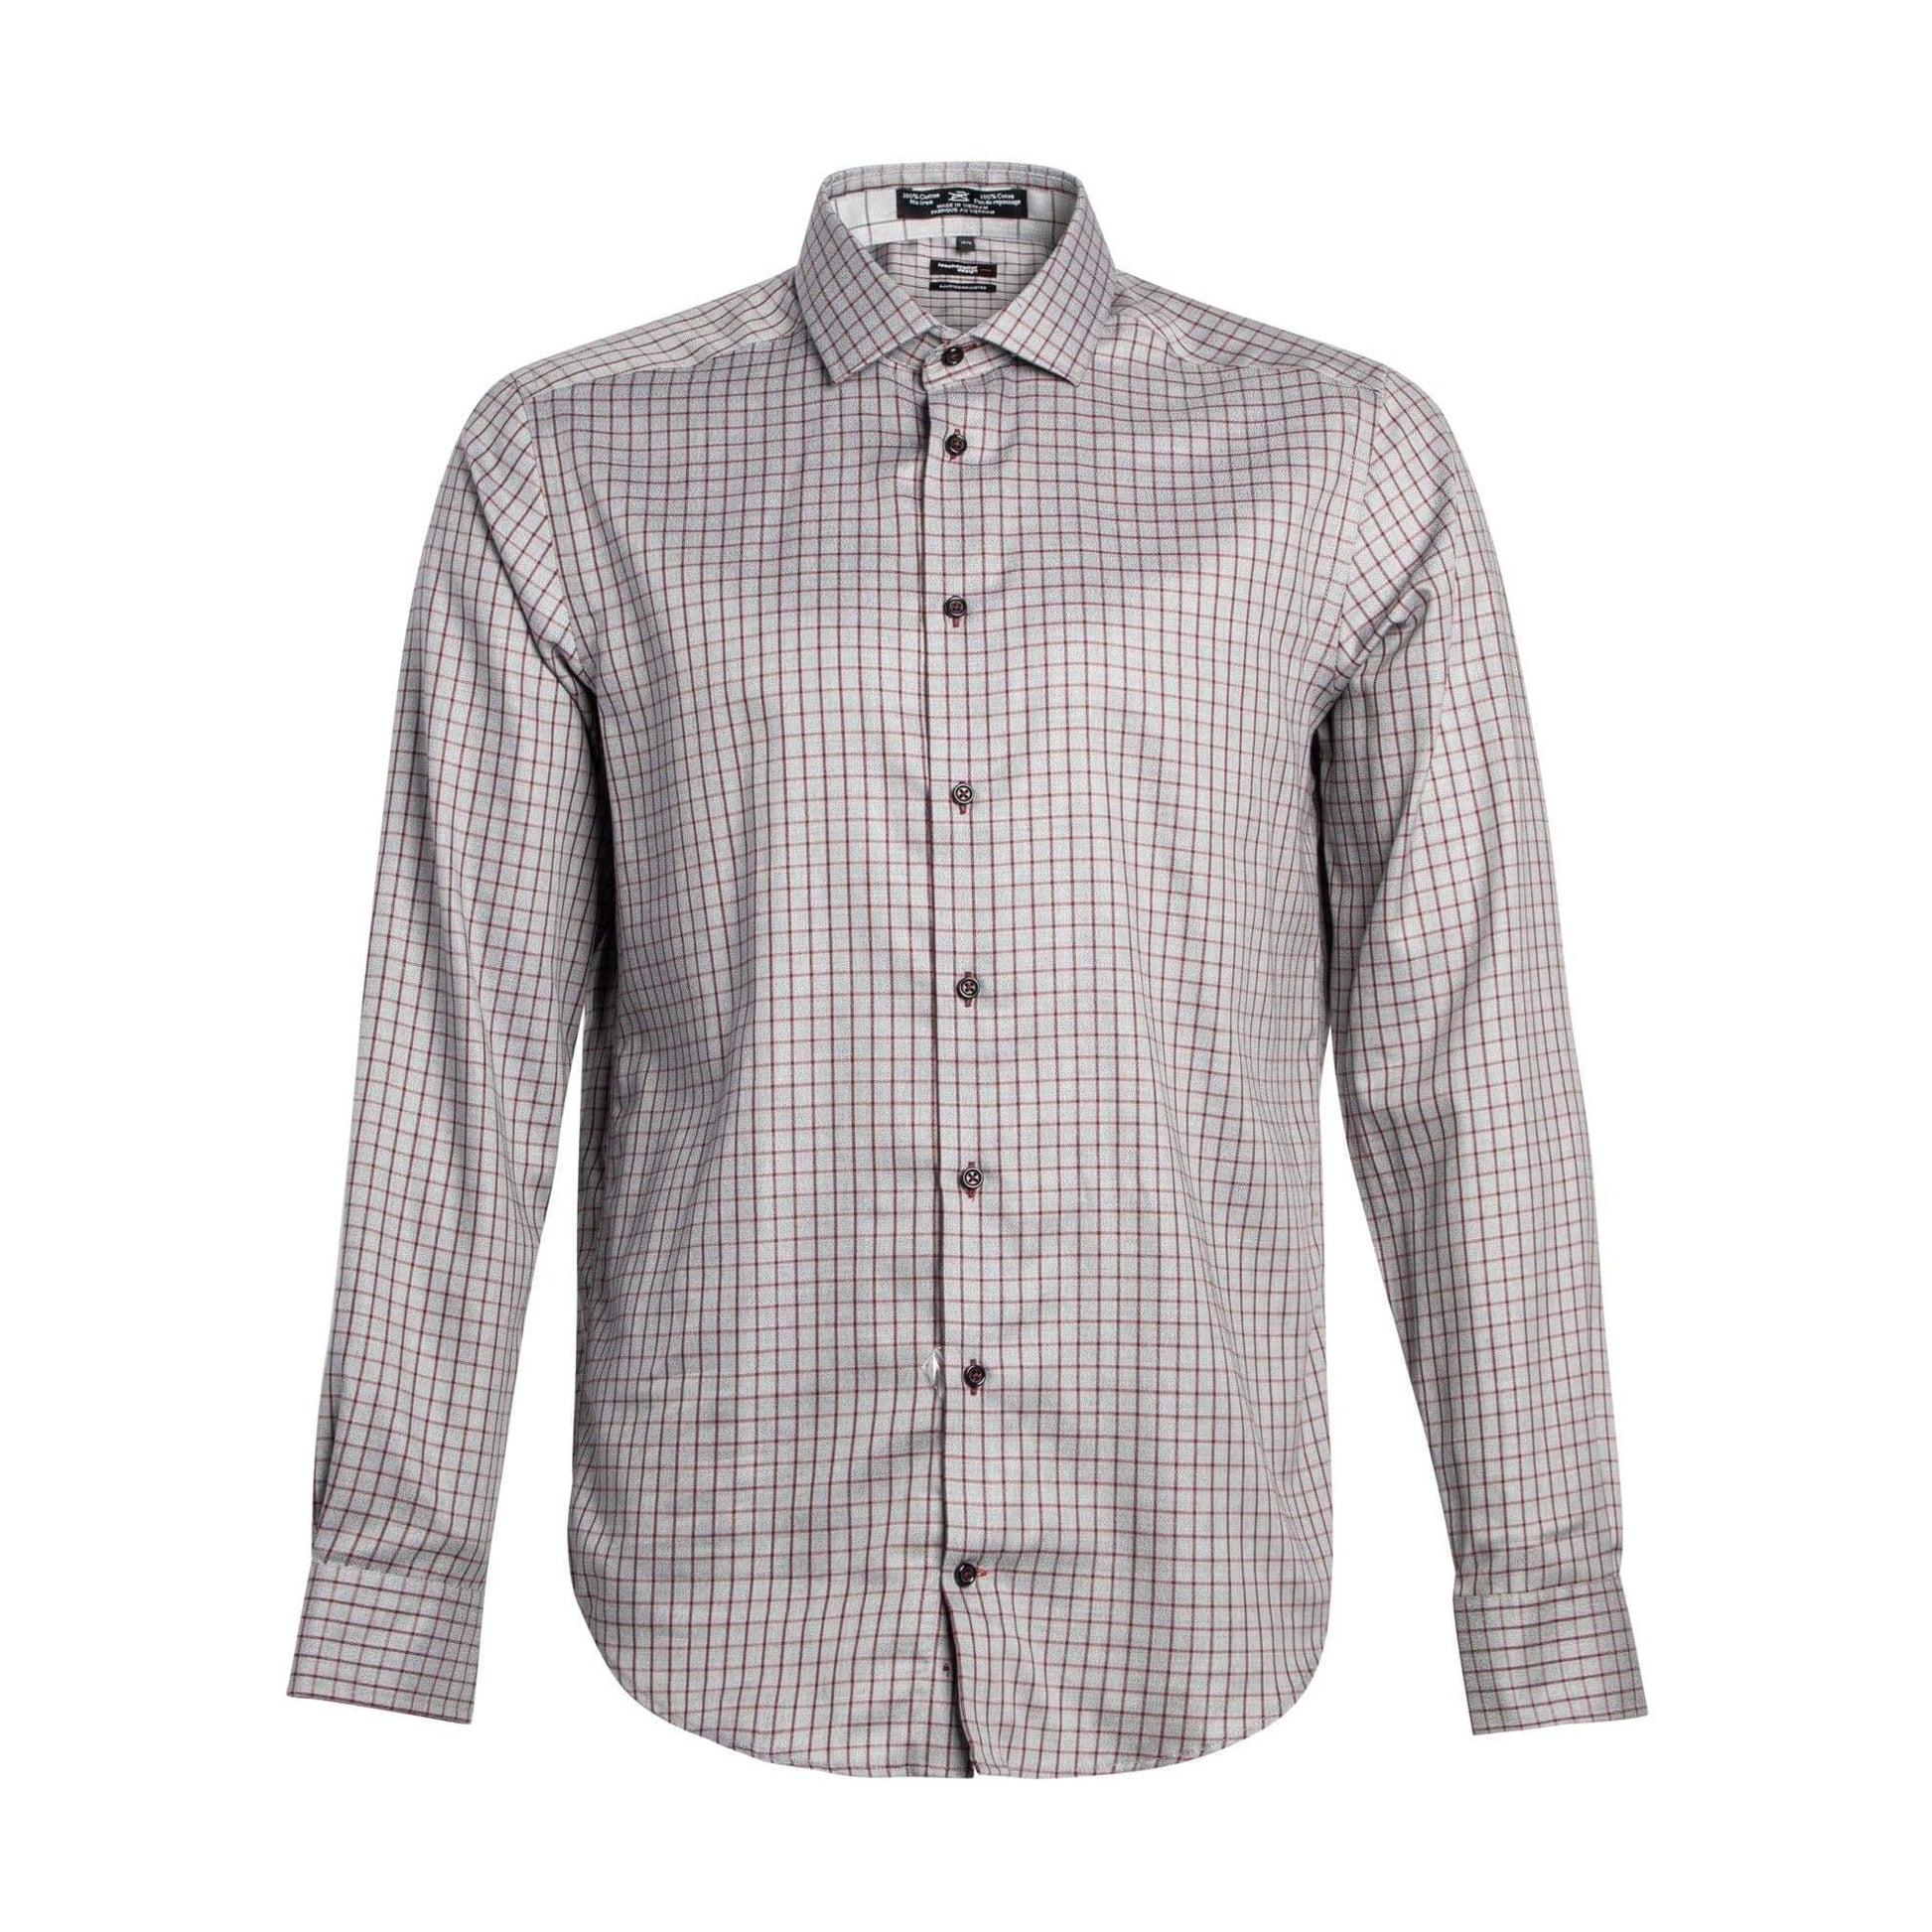 Leo Chevalier Design Leo Chevalier Fitted 100% Cotton Non Iron Long Sleeve Dress Shirts